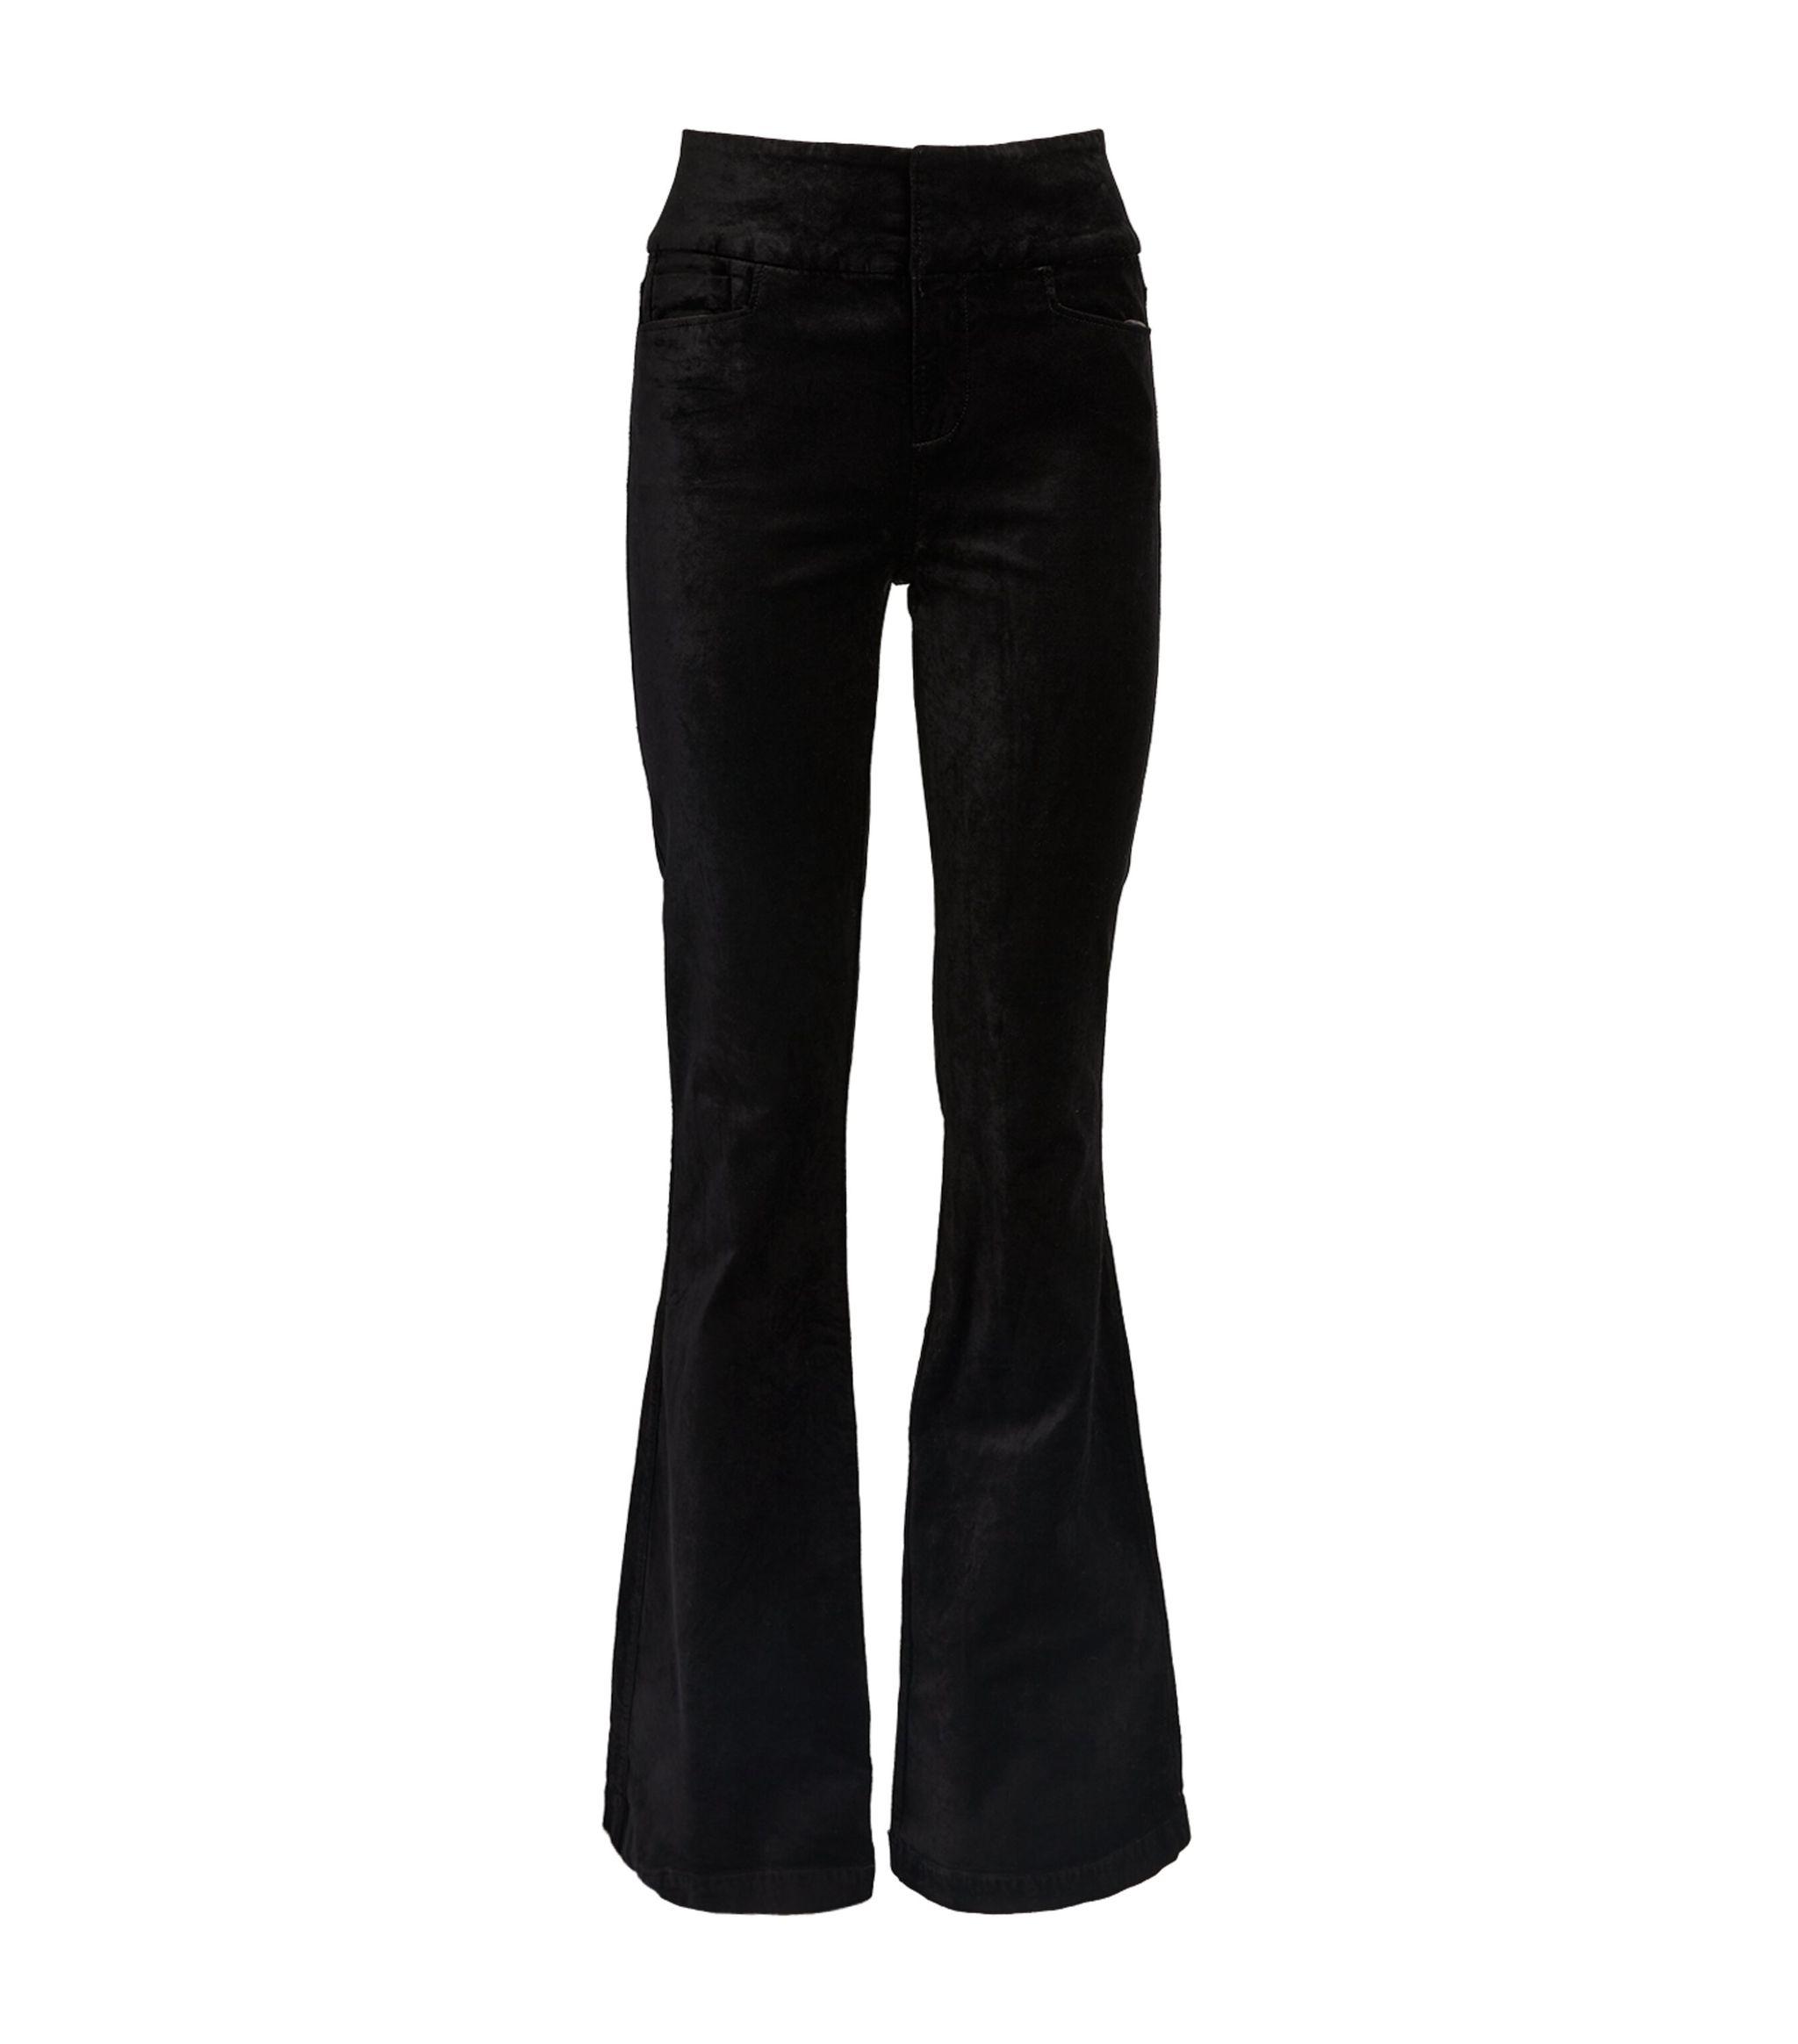 PAIGE Velvet Lou Lou Flared Trousers in Black | Lyst